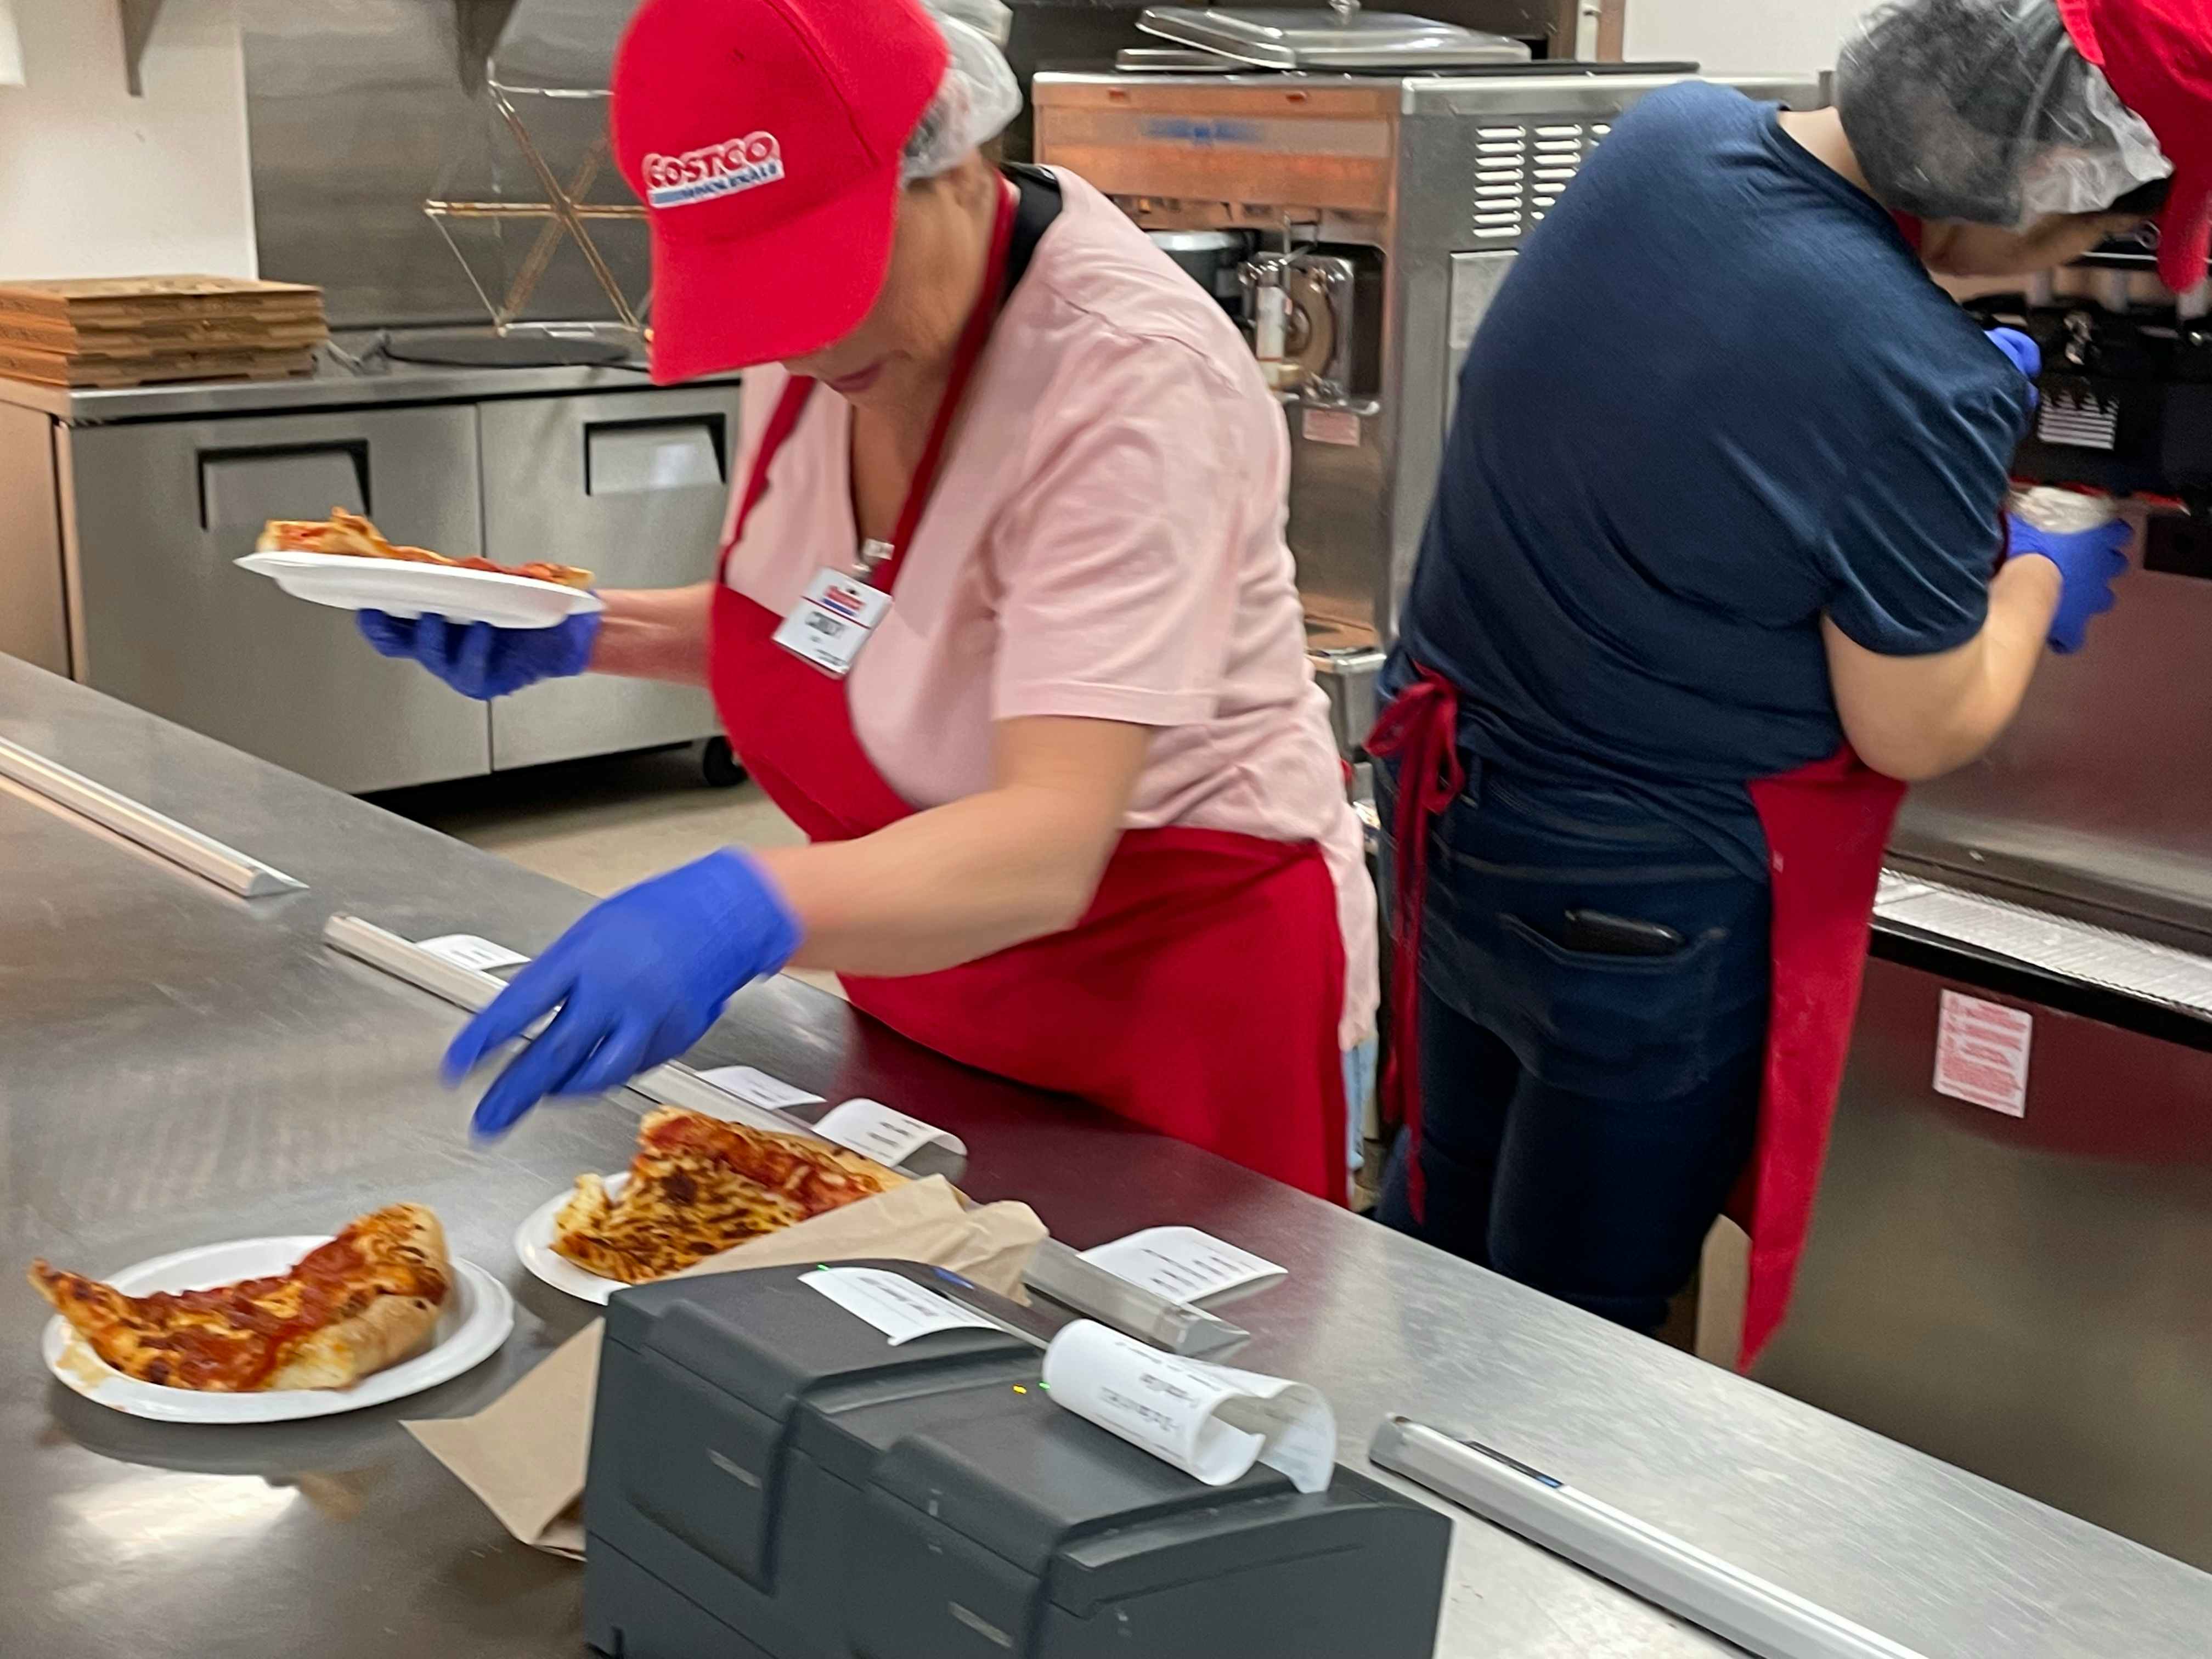 Costco employees preparing an order of pizza slices at the Costco food court